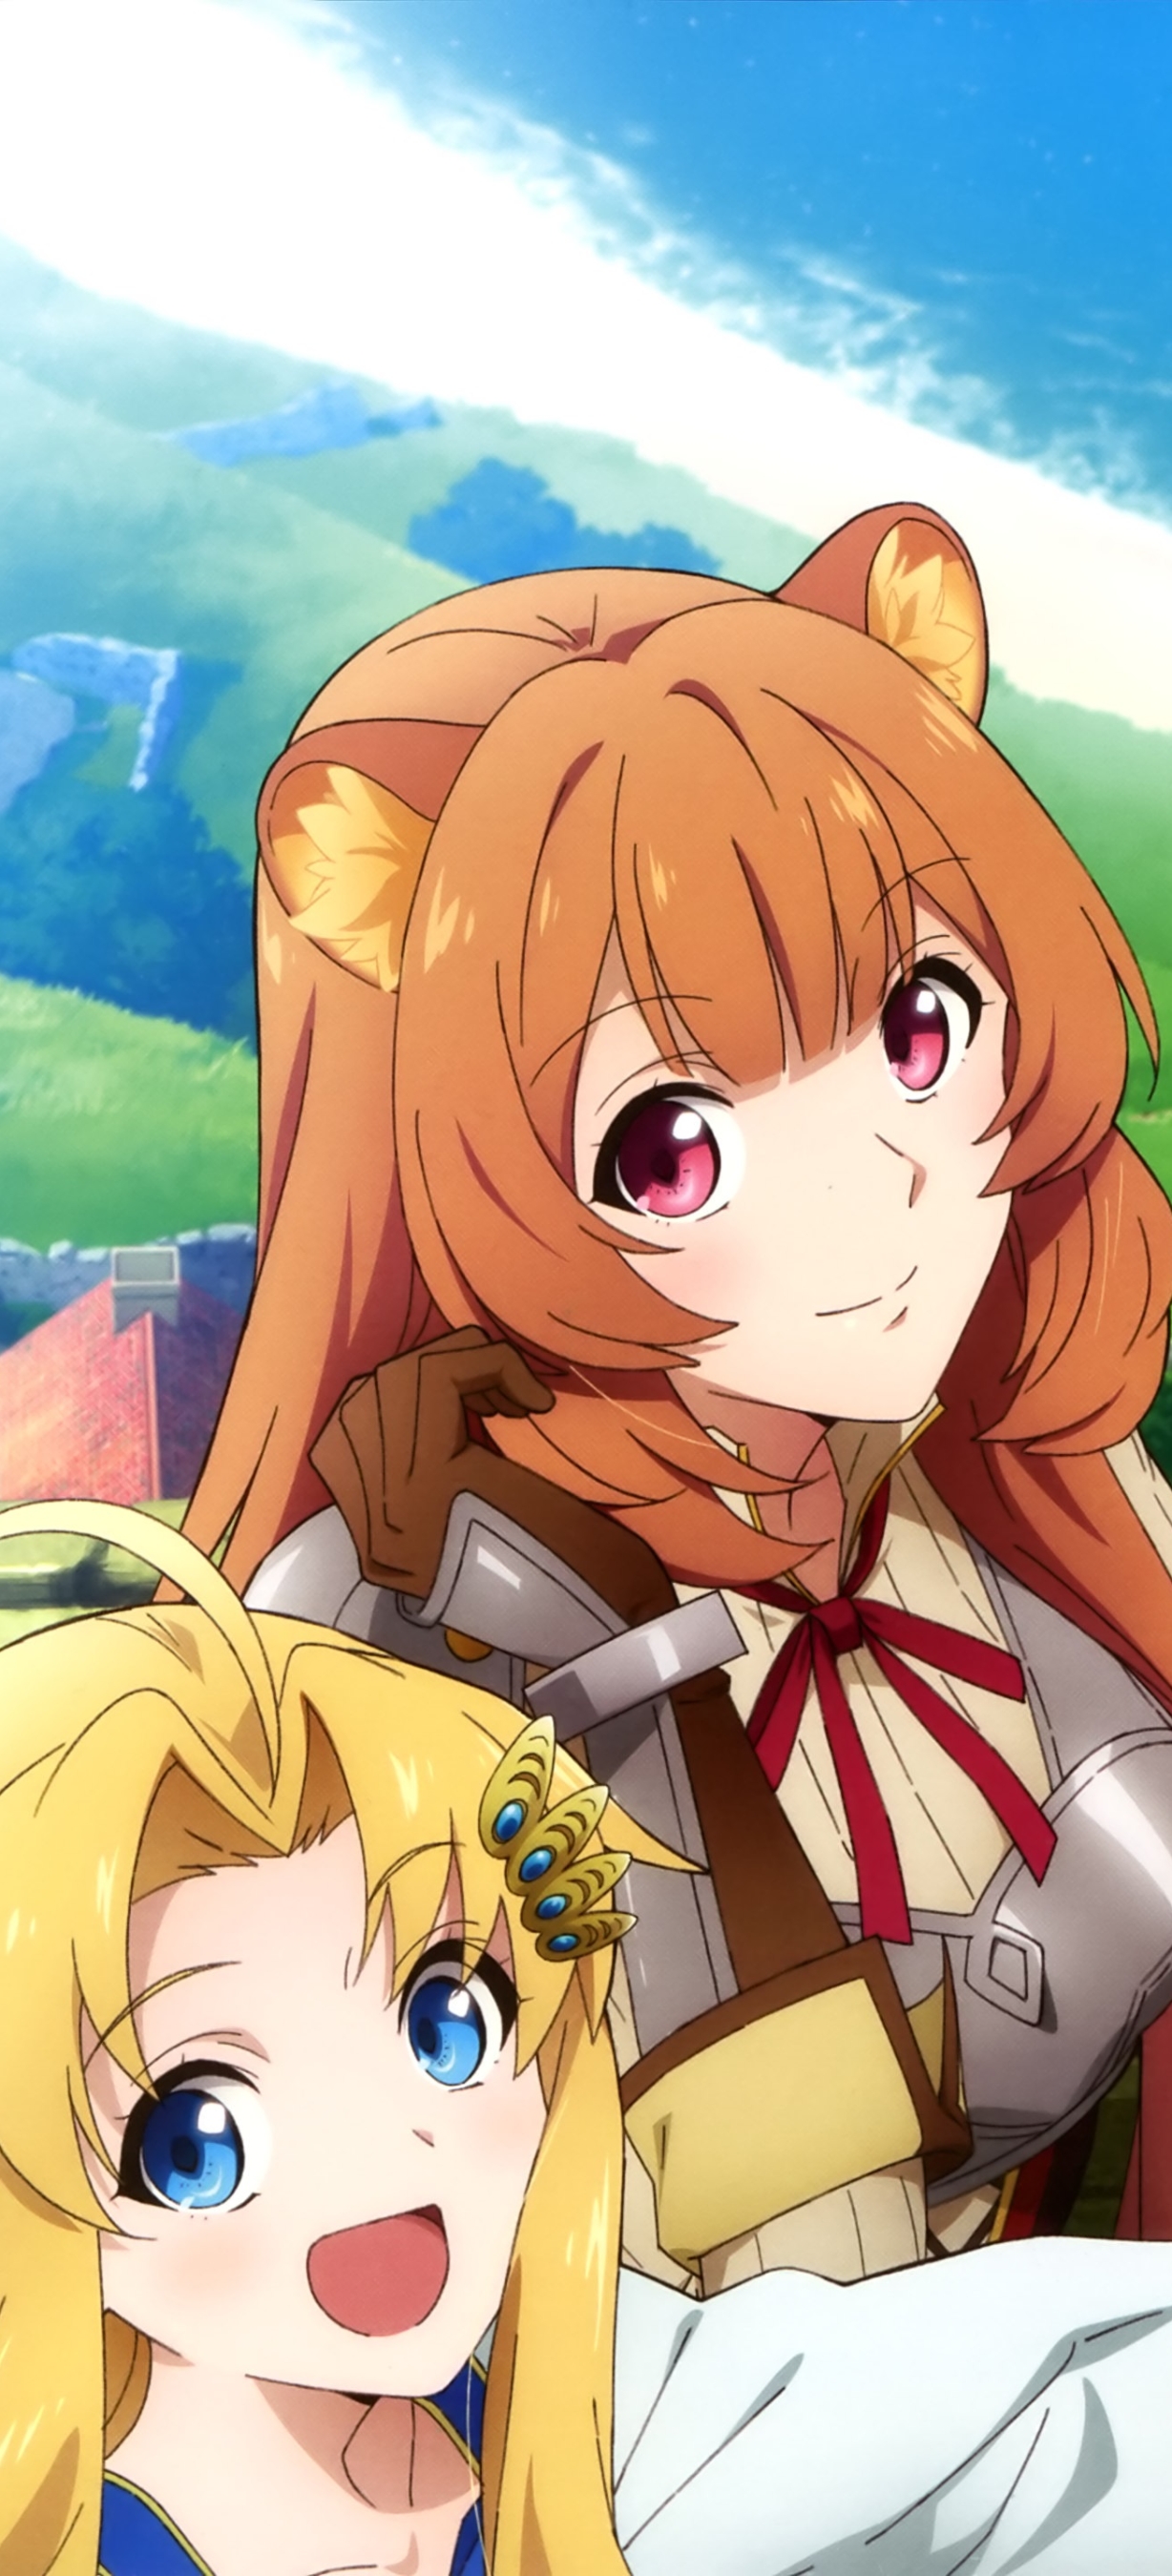 Mobile wallpaper: Anime, Raphtalia (The Rising Of The Shield Hero), The  Rising Of The Shield Hero, 1388340 download the picture for free.